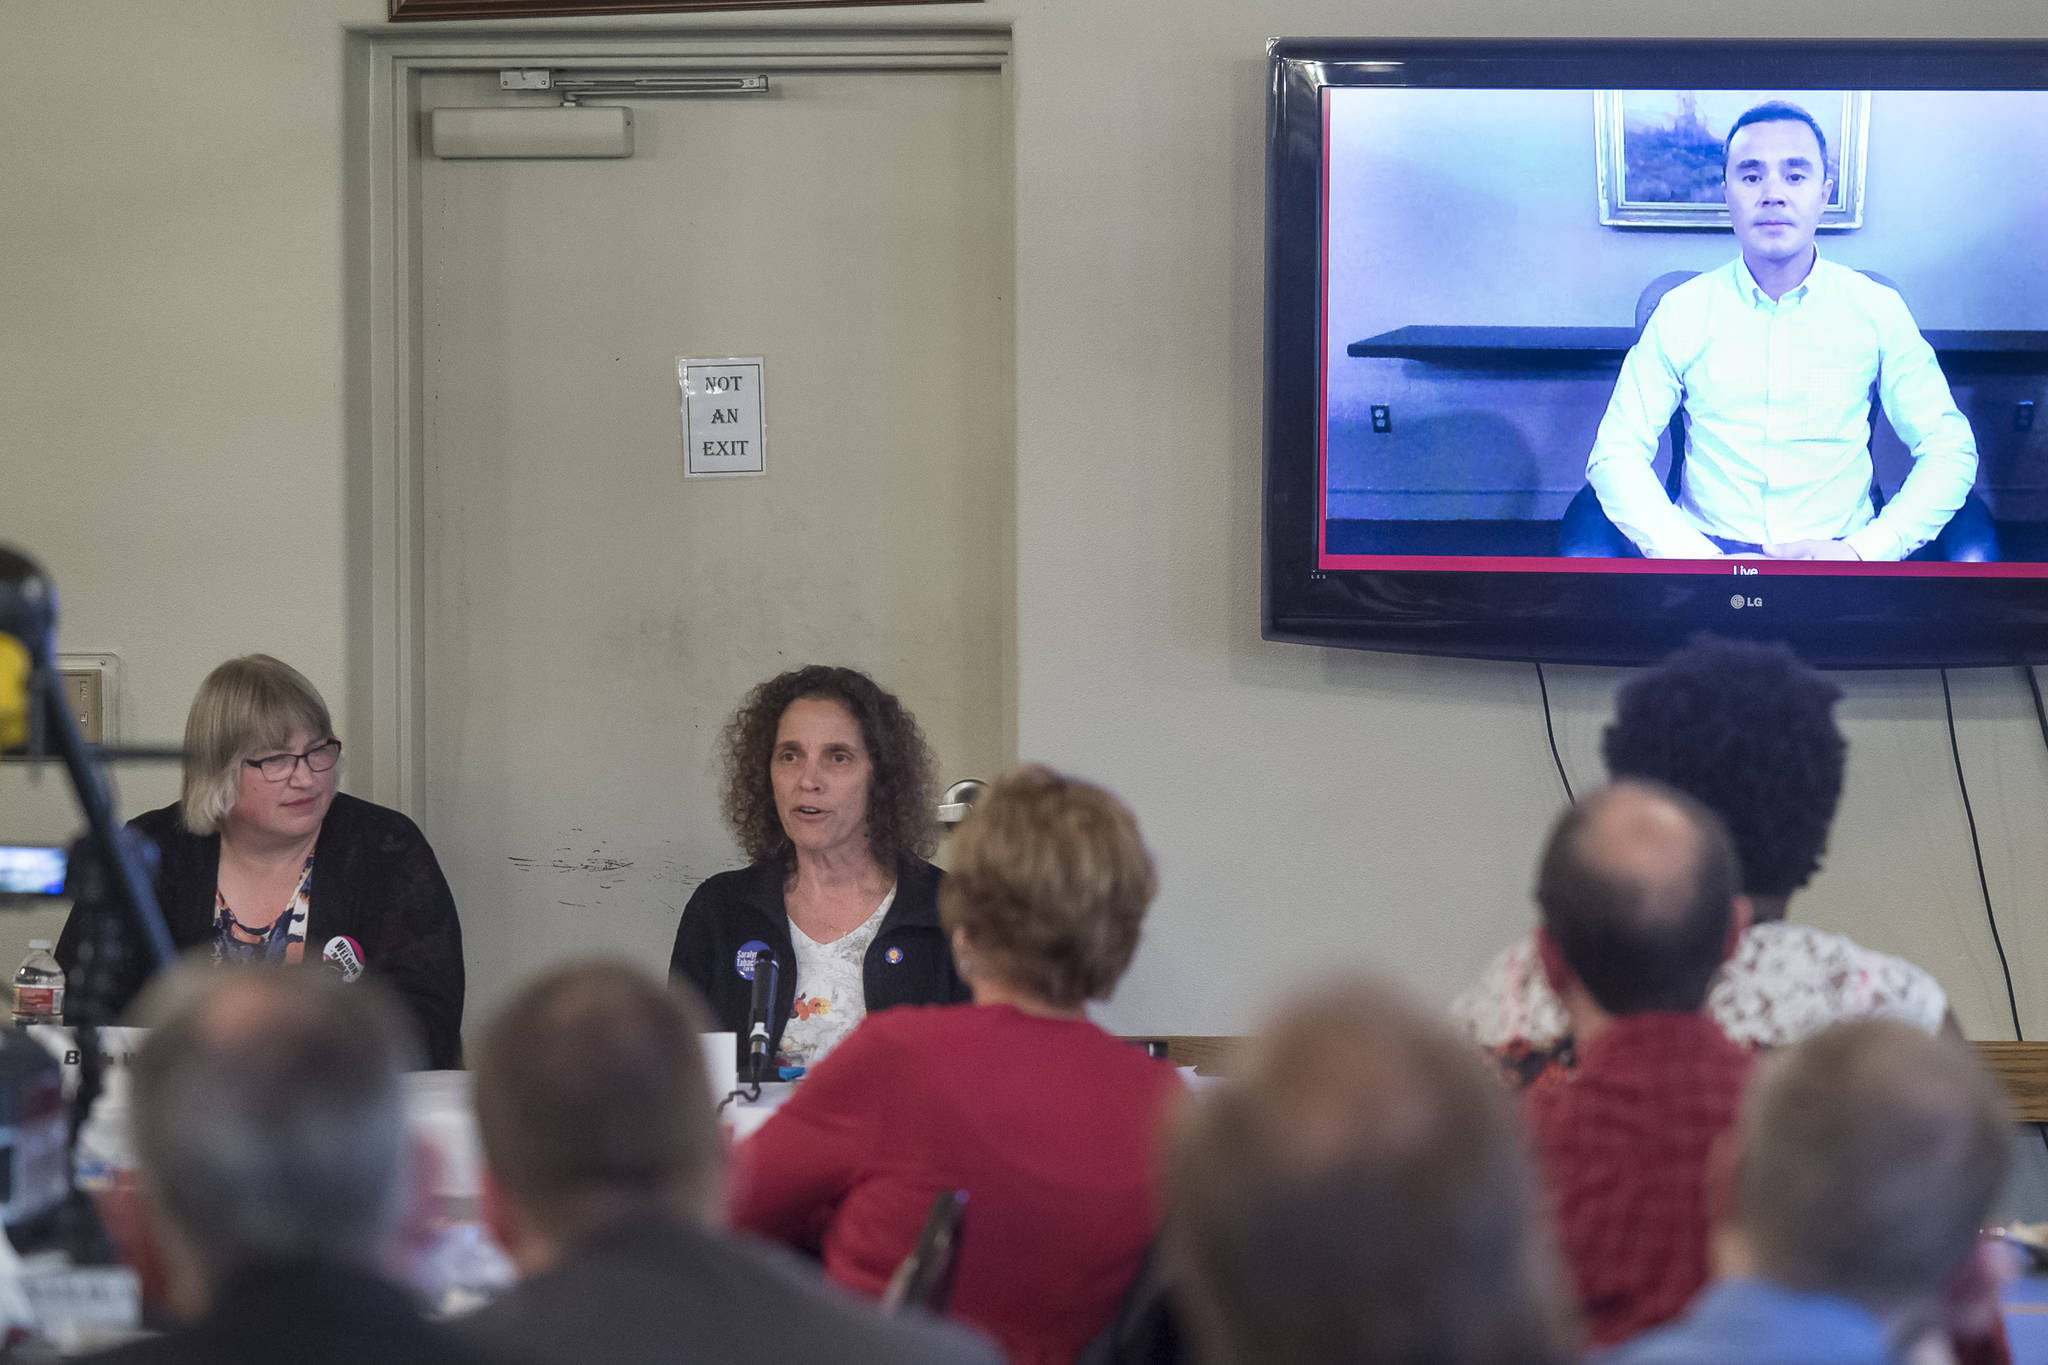 Juneau mayoral candidates Beth Weldon, left, Saralyn Tabachnick and Norton Gregory, via video conference, speak to the Juneau Chamber of Commerce during its weekly luncheon at the Moose Lodge on Thursday, Sept. 27, 2018. (Michael Penn | Juneau Empire)